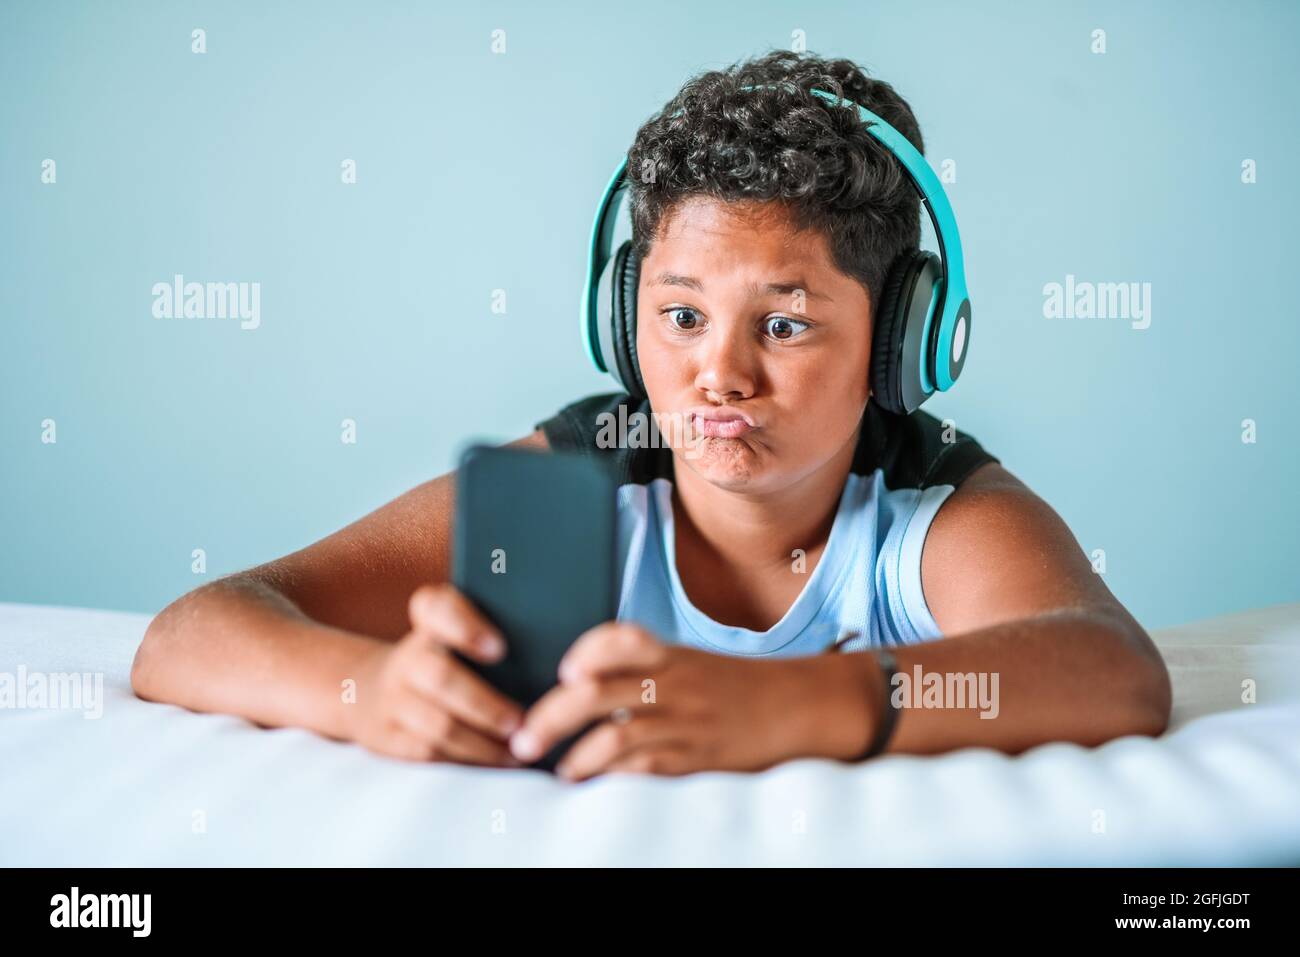 Charismatic young boy pulling a quirky face while listening to music on stereo headphones using his mobile phone Stock Photo